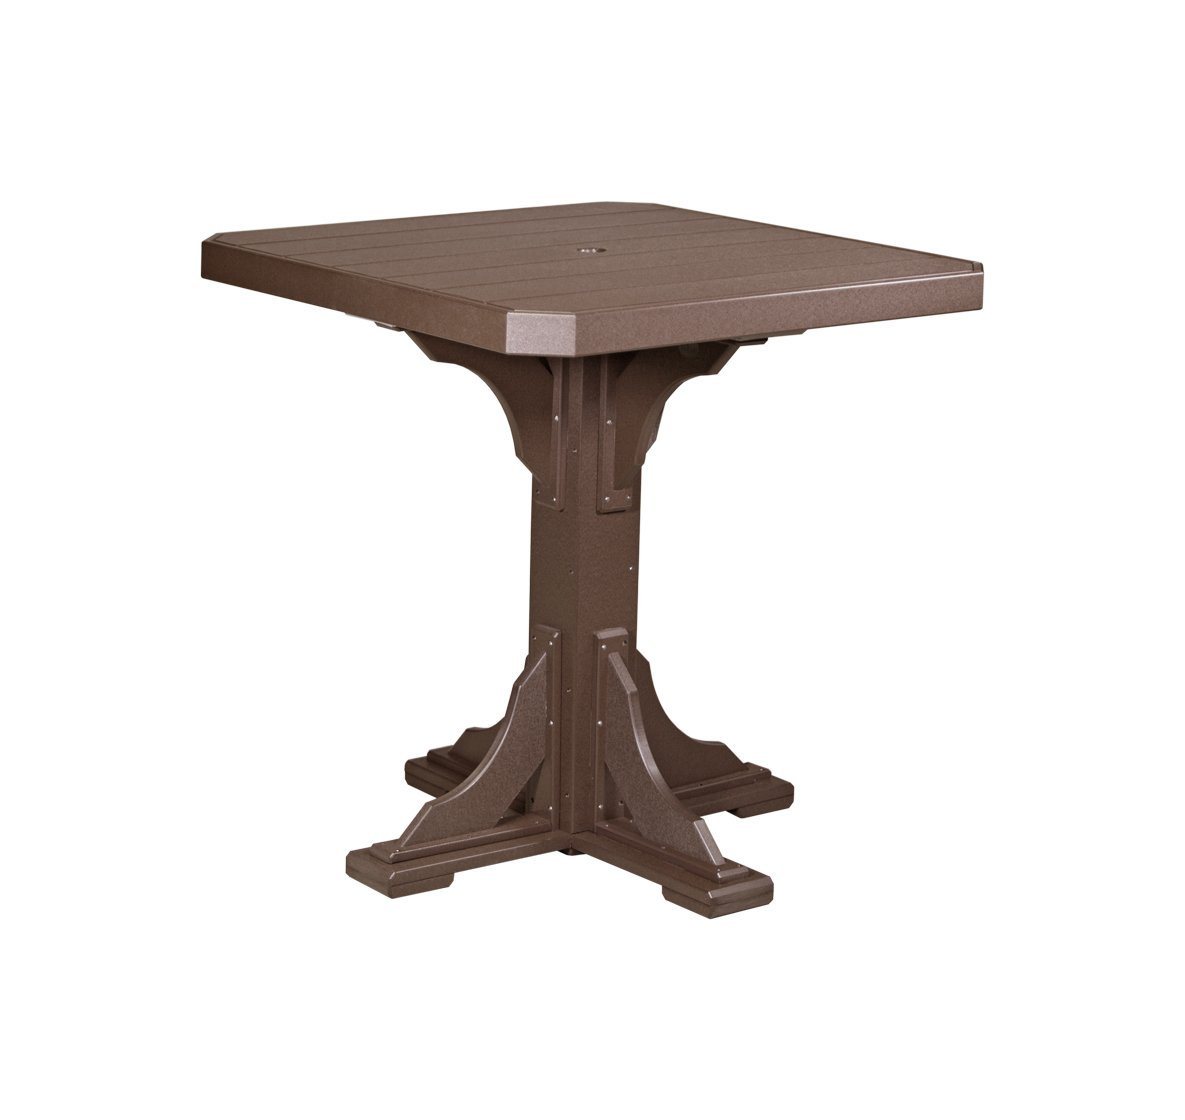 Luxcraft PolyTuf 41" Square Dining Table